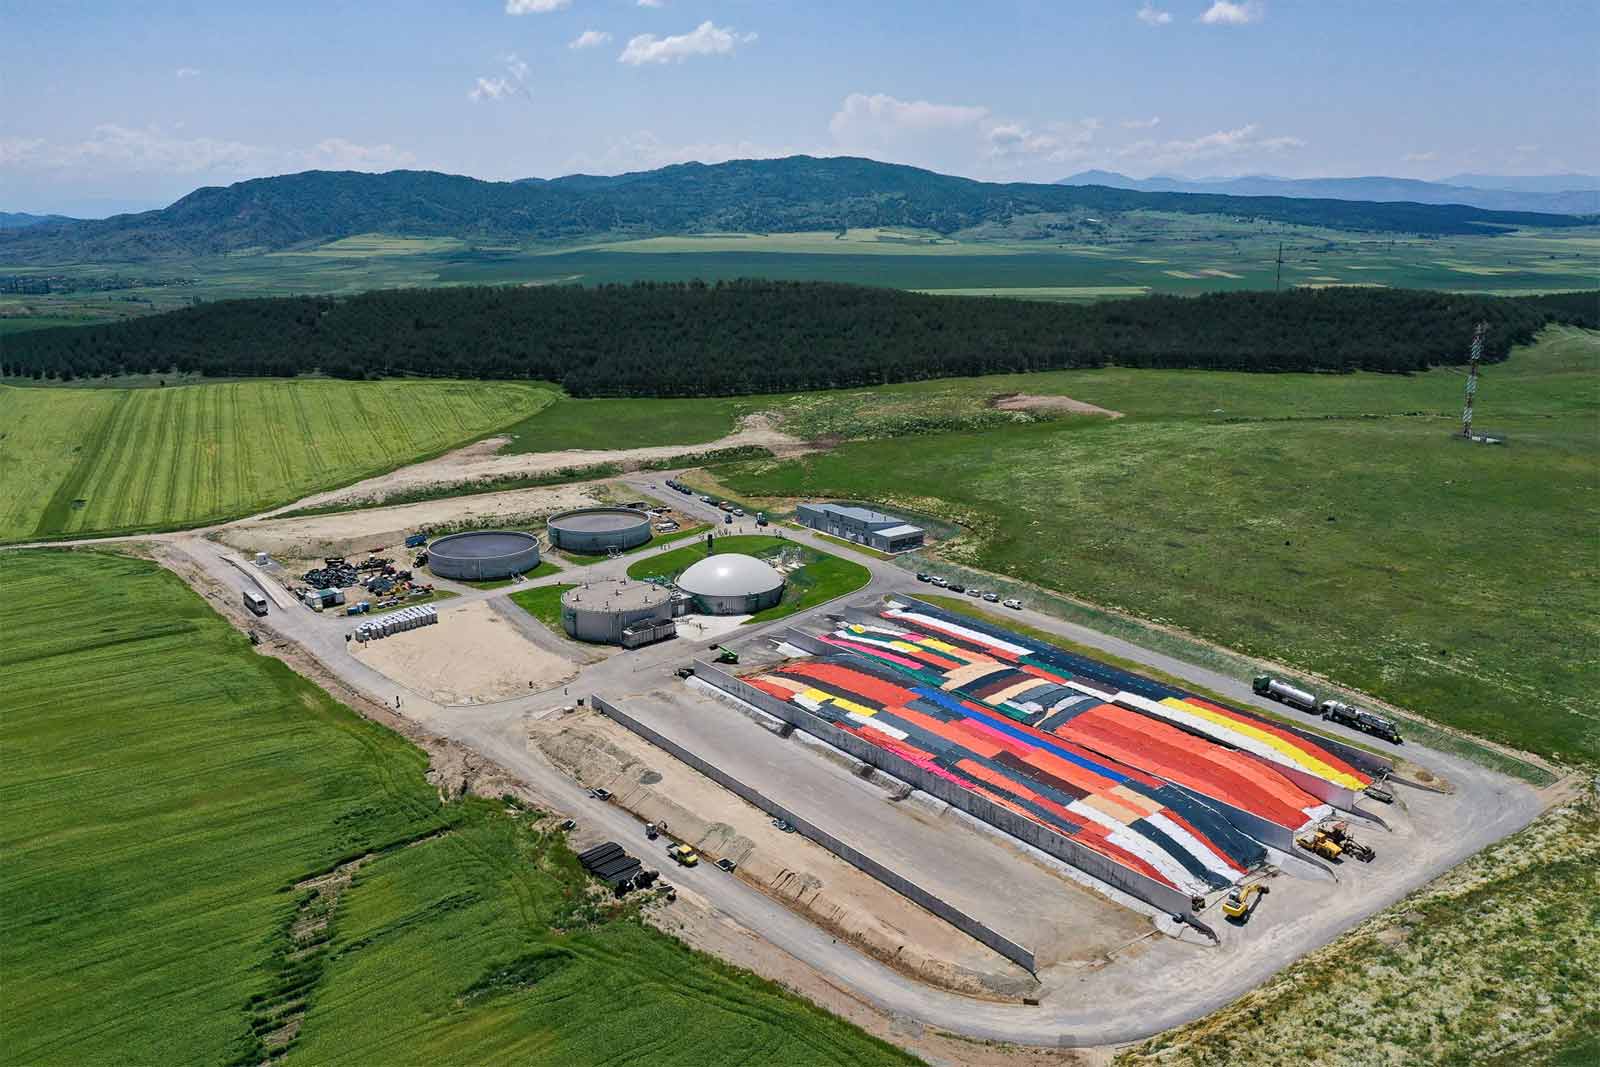 The Saramzalino biogas plant in Lozovo, North Macedonia, was commissioned after exactly two years of construction. (Photograph: Provided by Feroinvest Group)